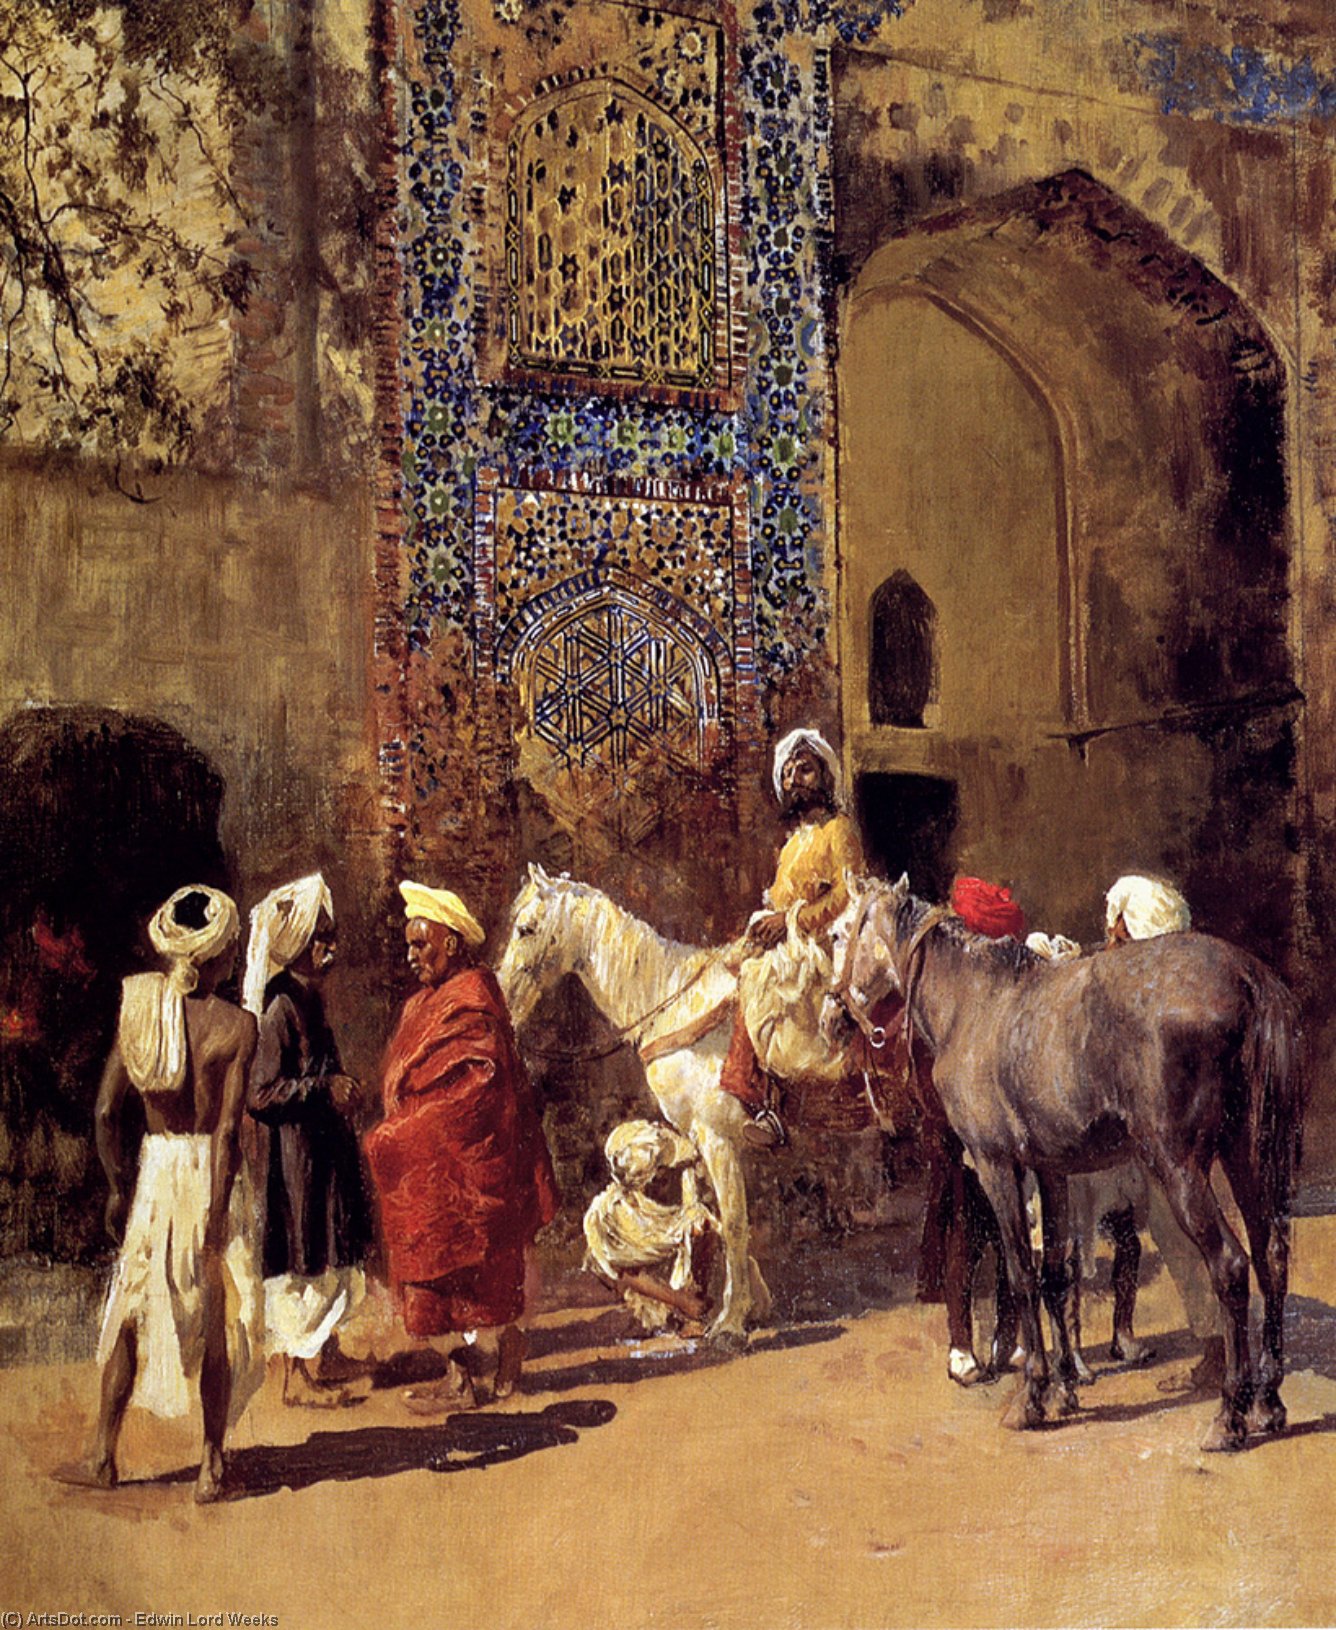 Buy Museum Art Reproductions Blue-Tiled Mosque At Delhi, India by Edwin Lord Weeks (1849-1903, United States) | ArtsDot.com